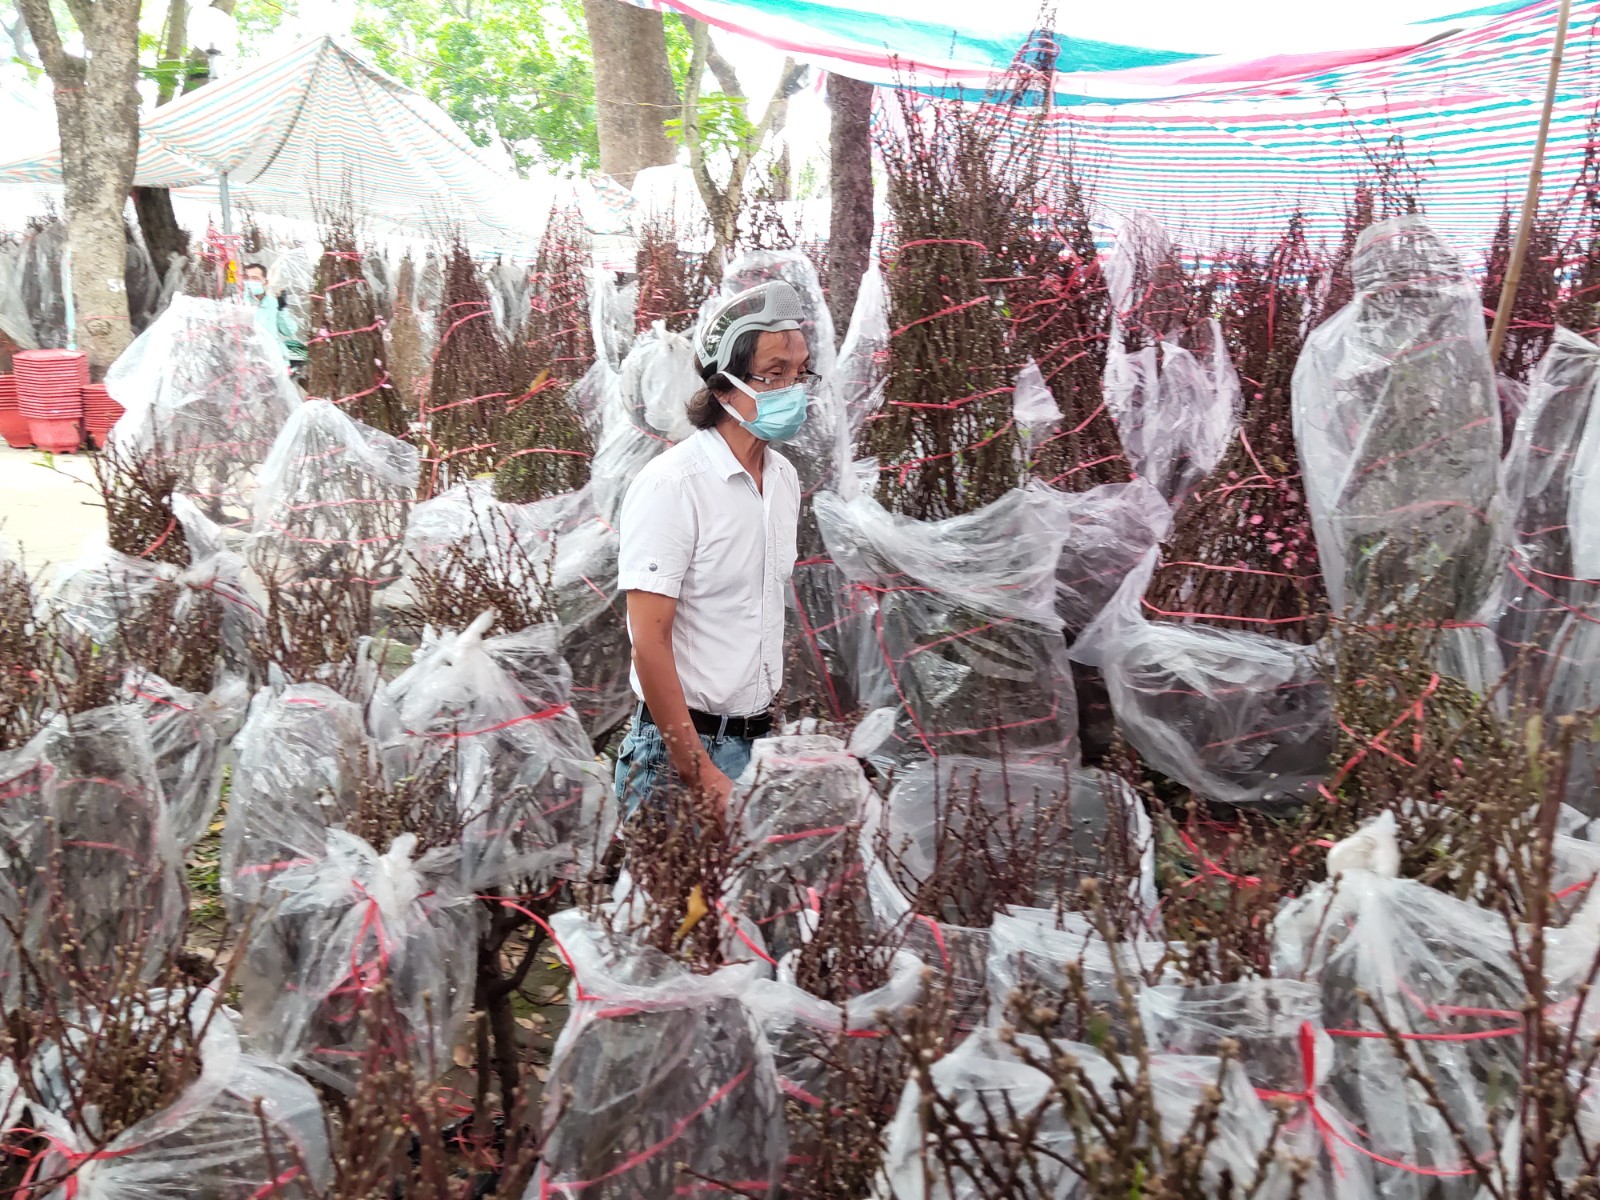 A man sells peach blossom trees at Gia Dinh Park in Go Vap District, Ho Chi Minh City. Photo: N.Tri / Tuoi Tre